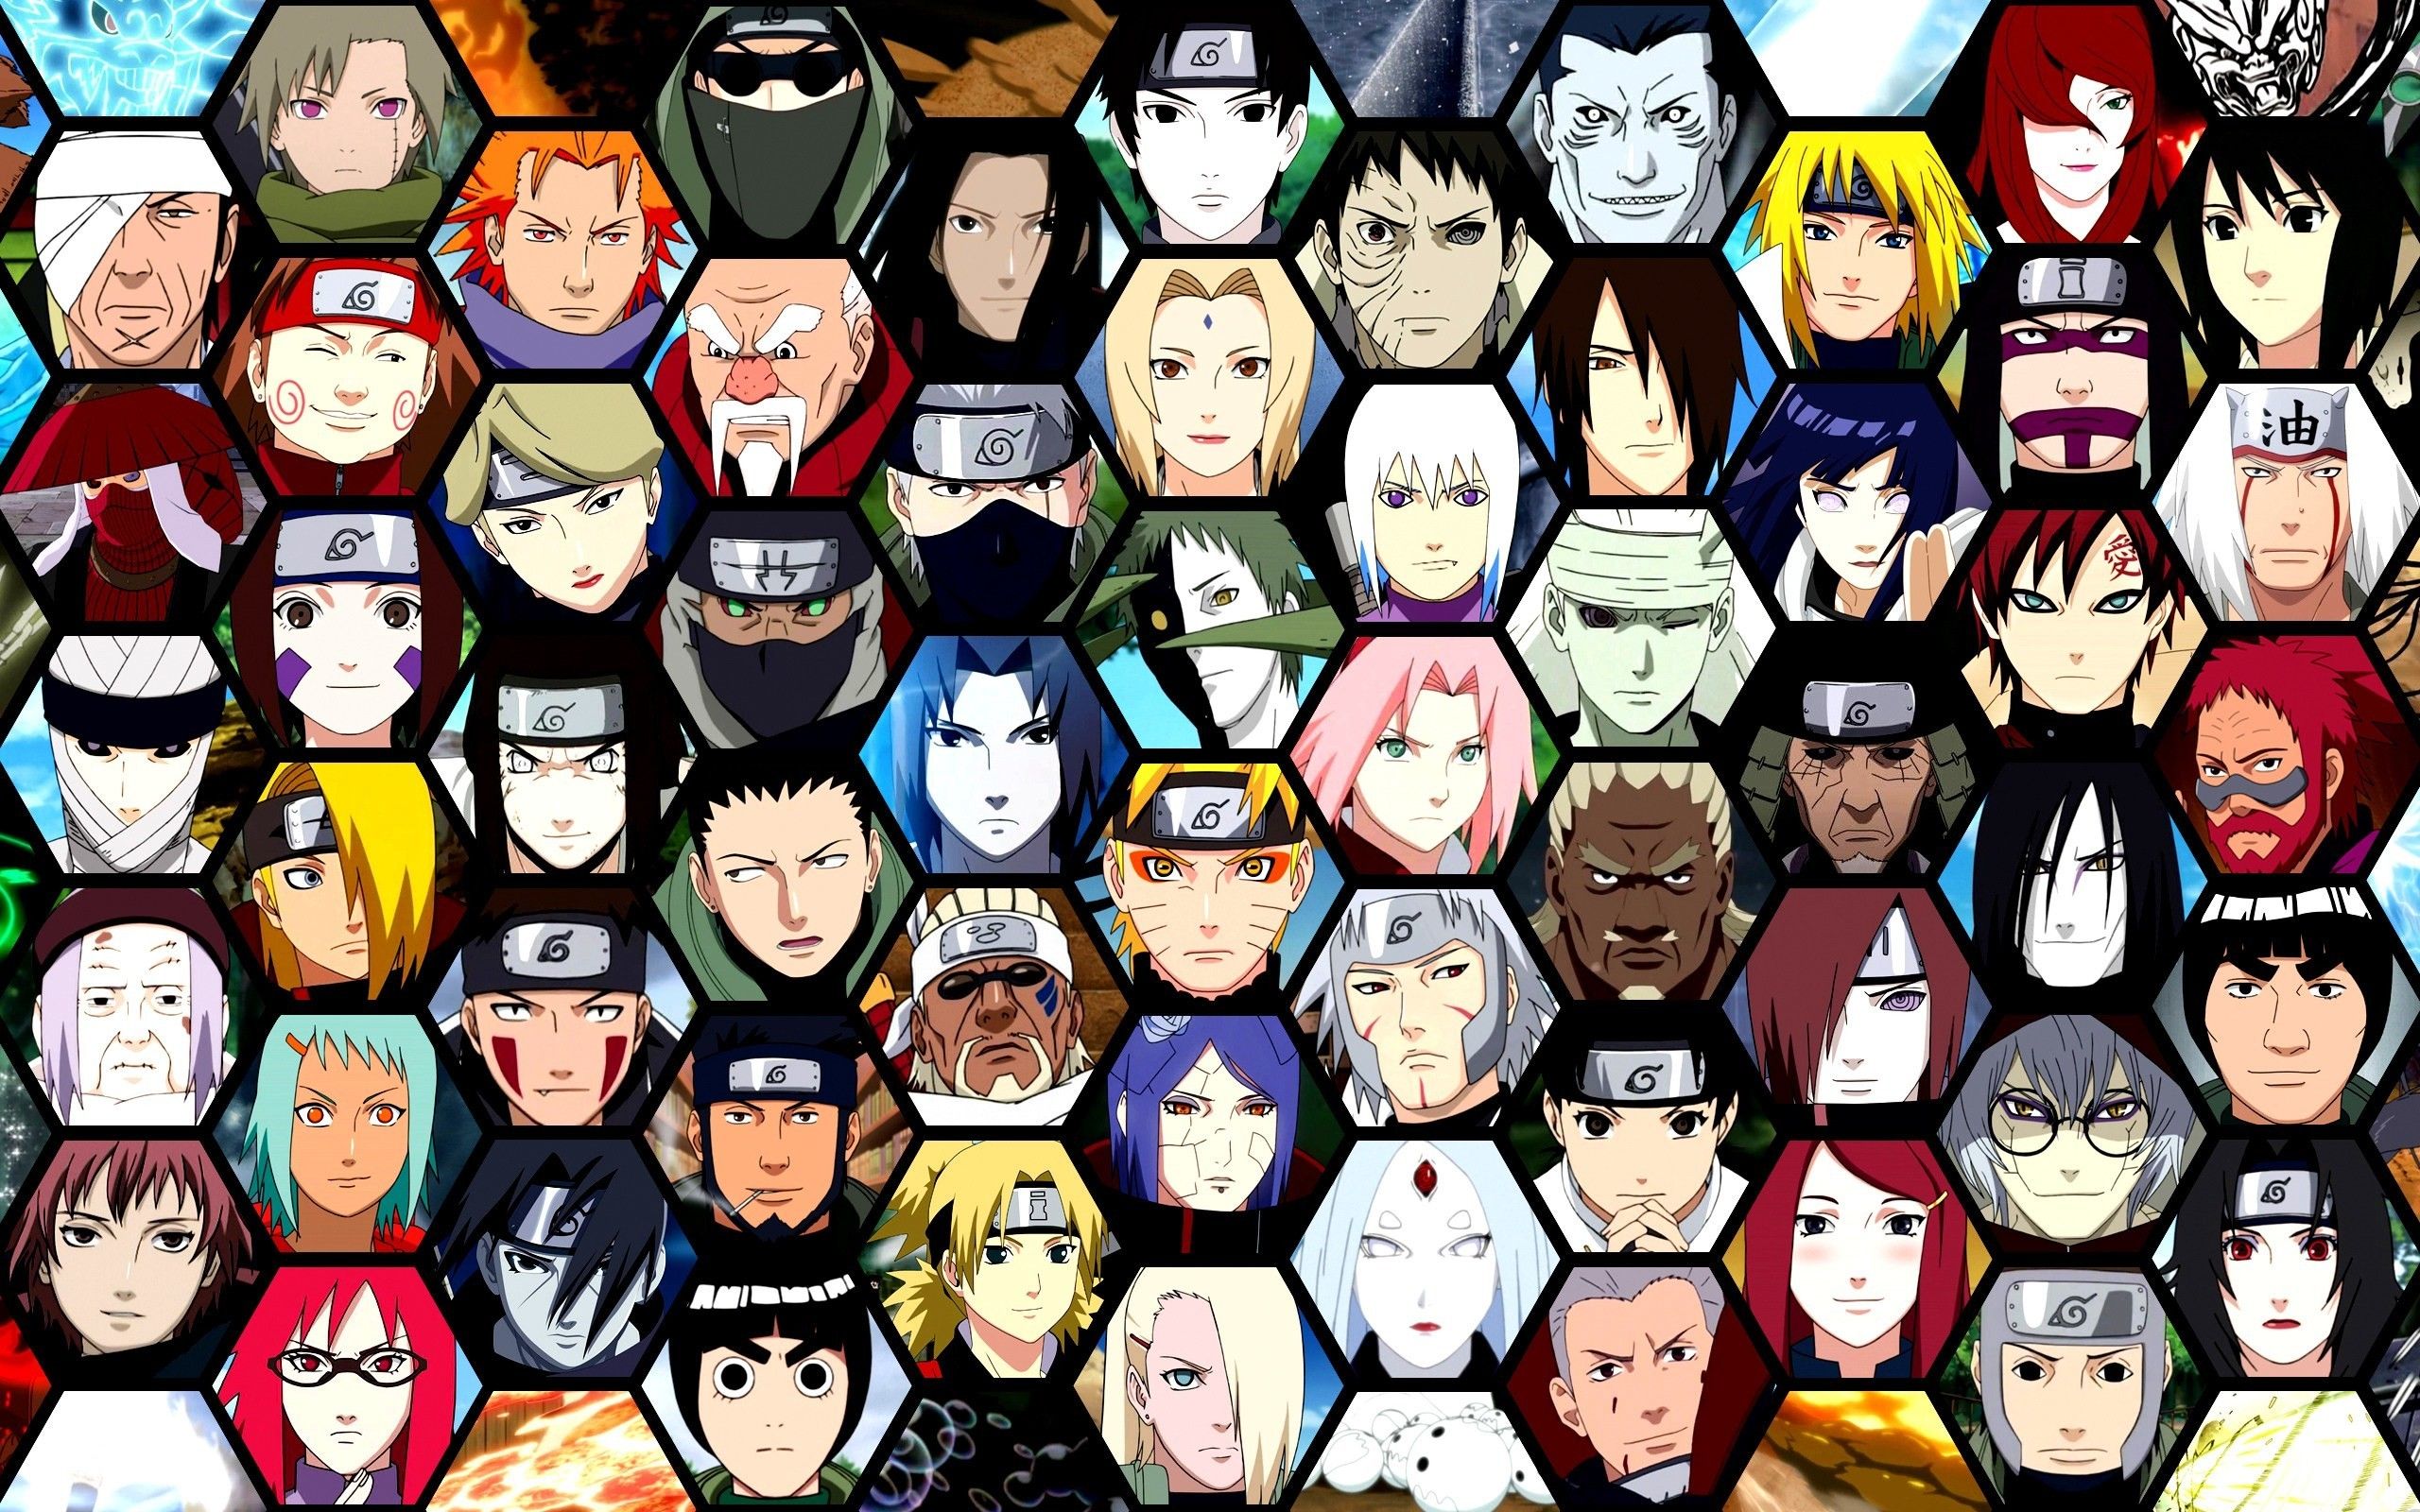 Naruto shippuden characters Wallpapers Download